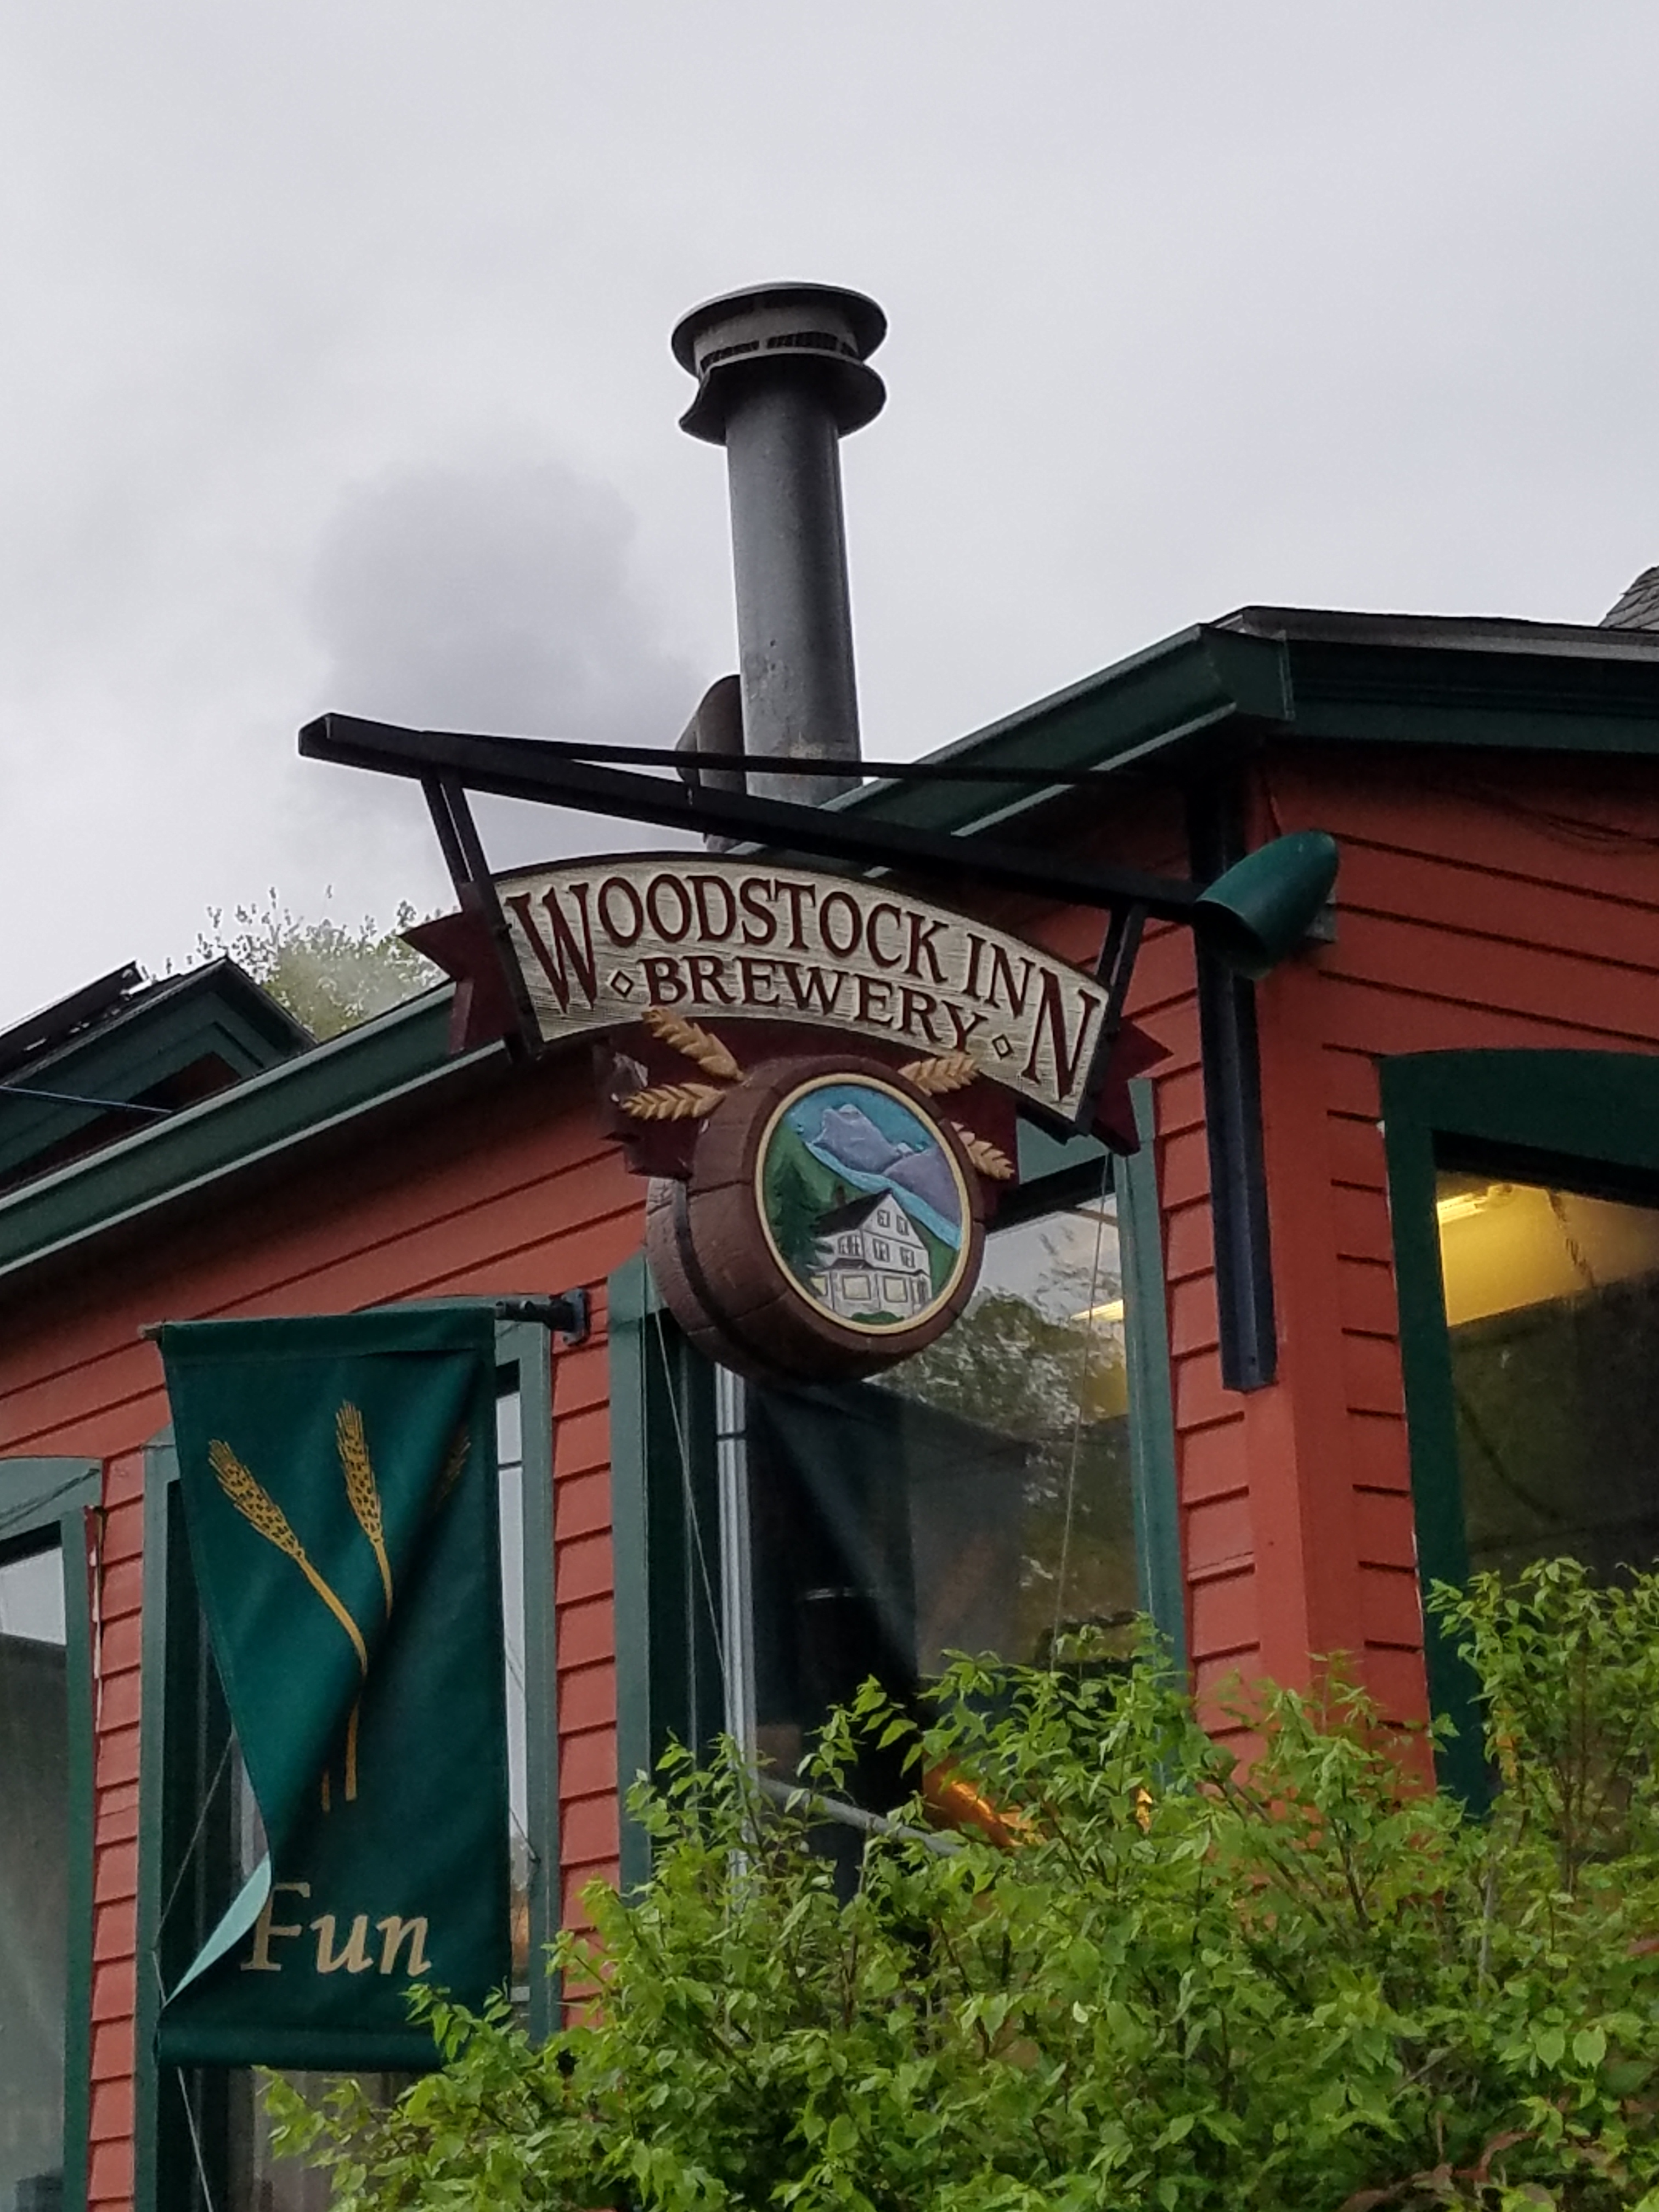 Woodstock Inn Station & Brewery, North Woodstock, NH - Search For The ...